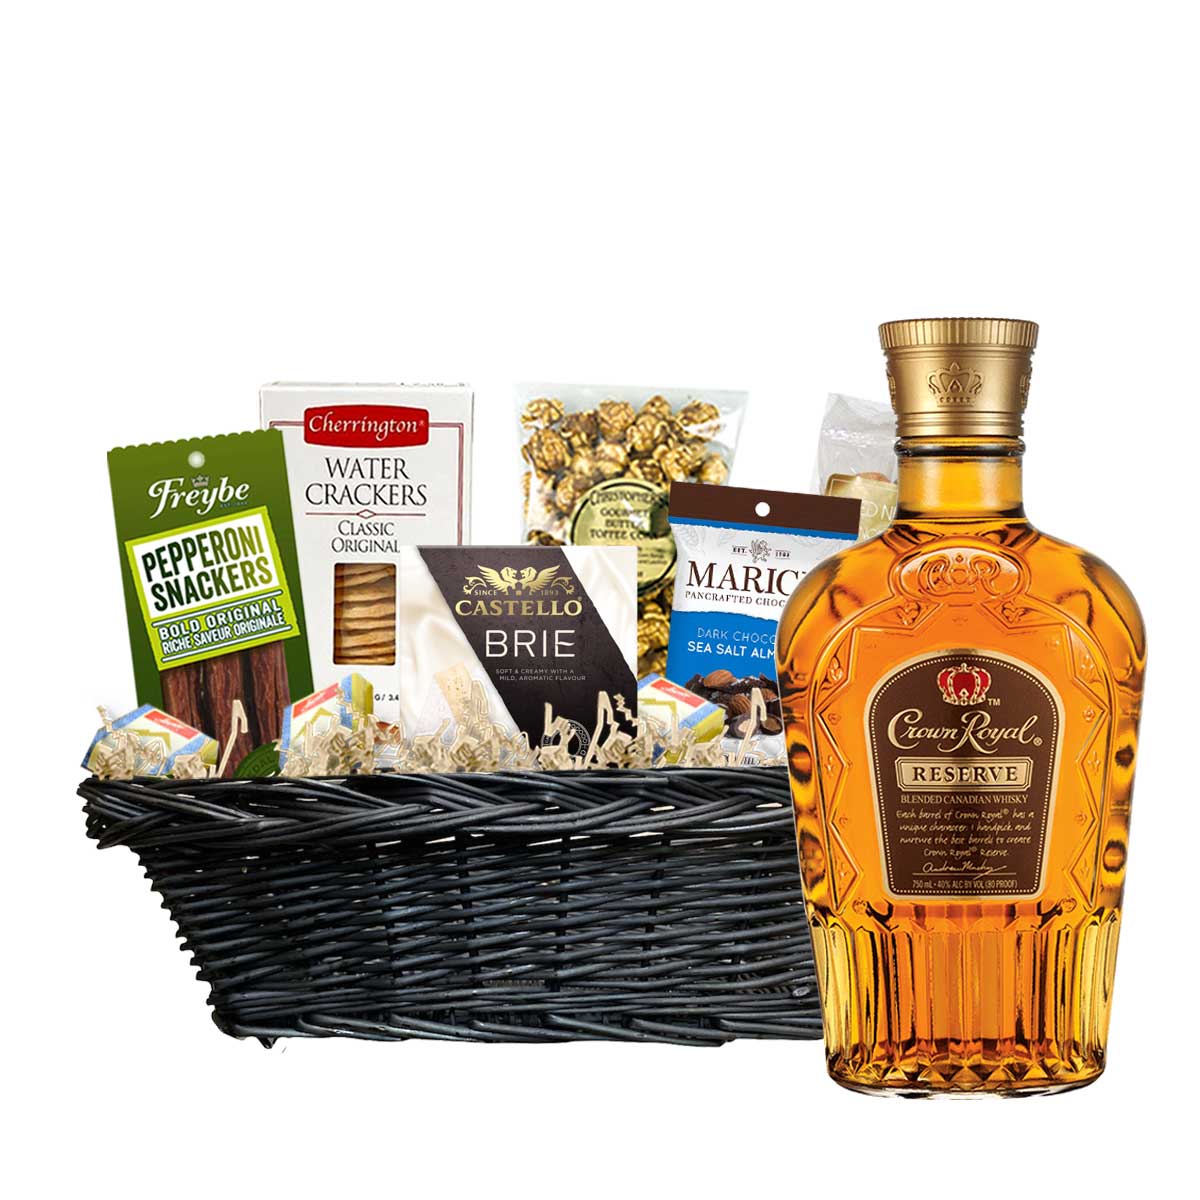 TAG Liquor Stores Canada Delivery-Crown Royal Reserve Whisky 750ml Corporate Gift Basket-spirits-tagliquorstores.com